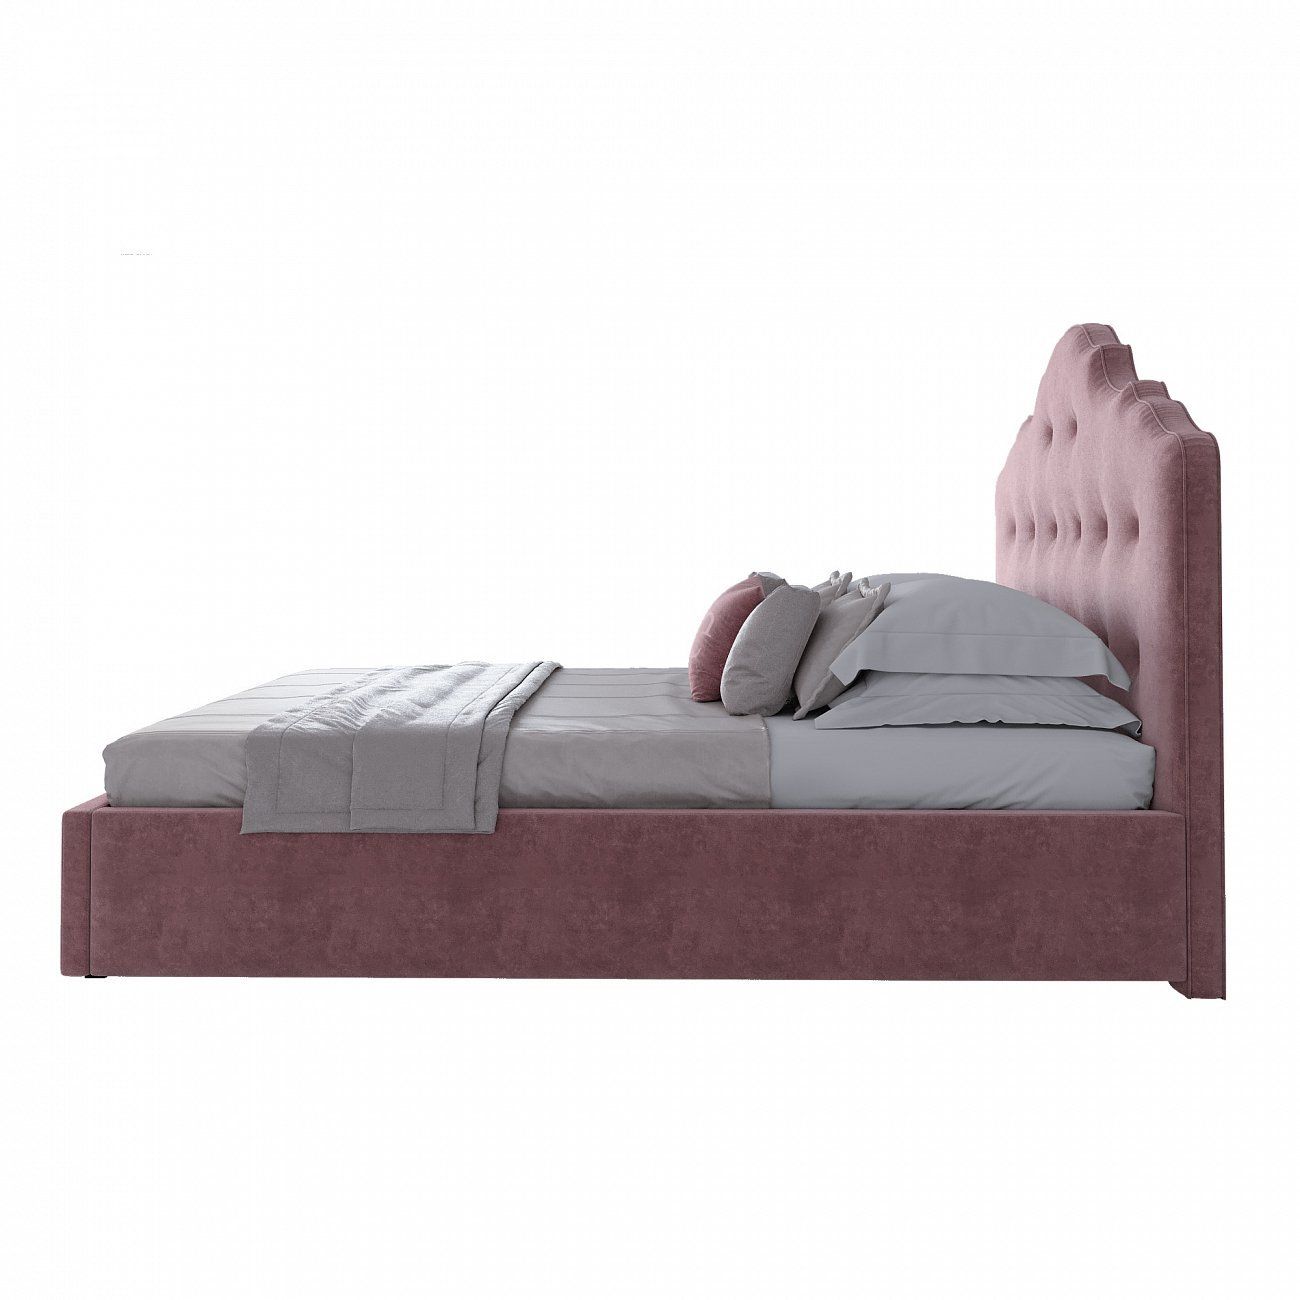 Teenage bed with a soft headboard 140x200 cm dusty Rose Palace